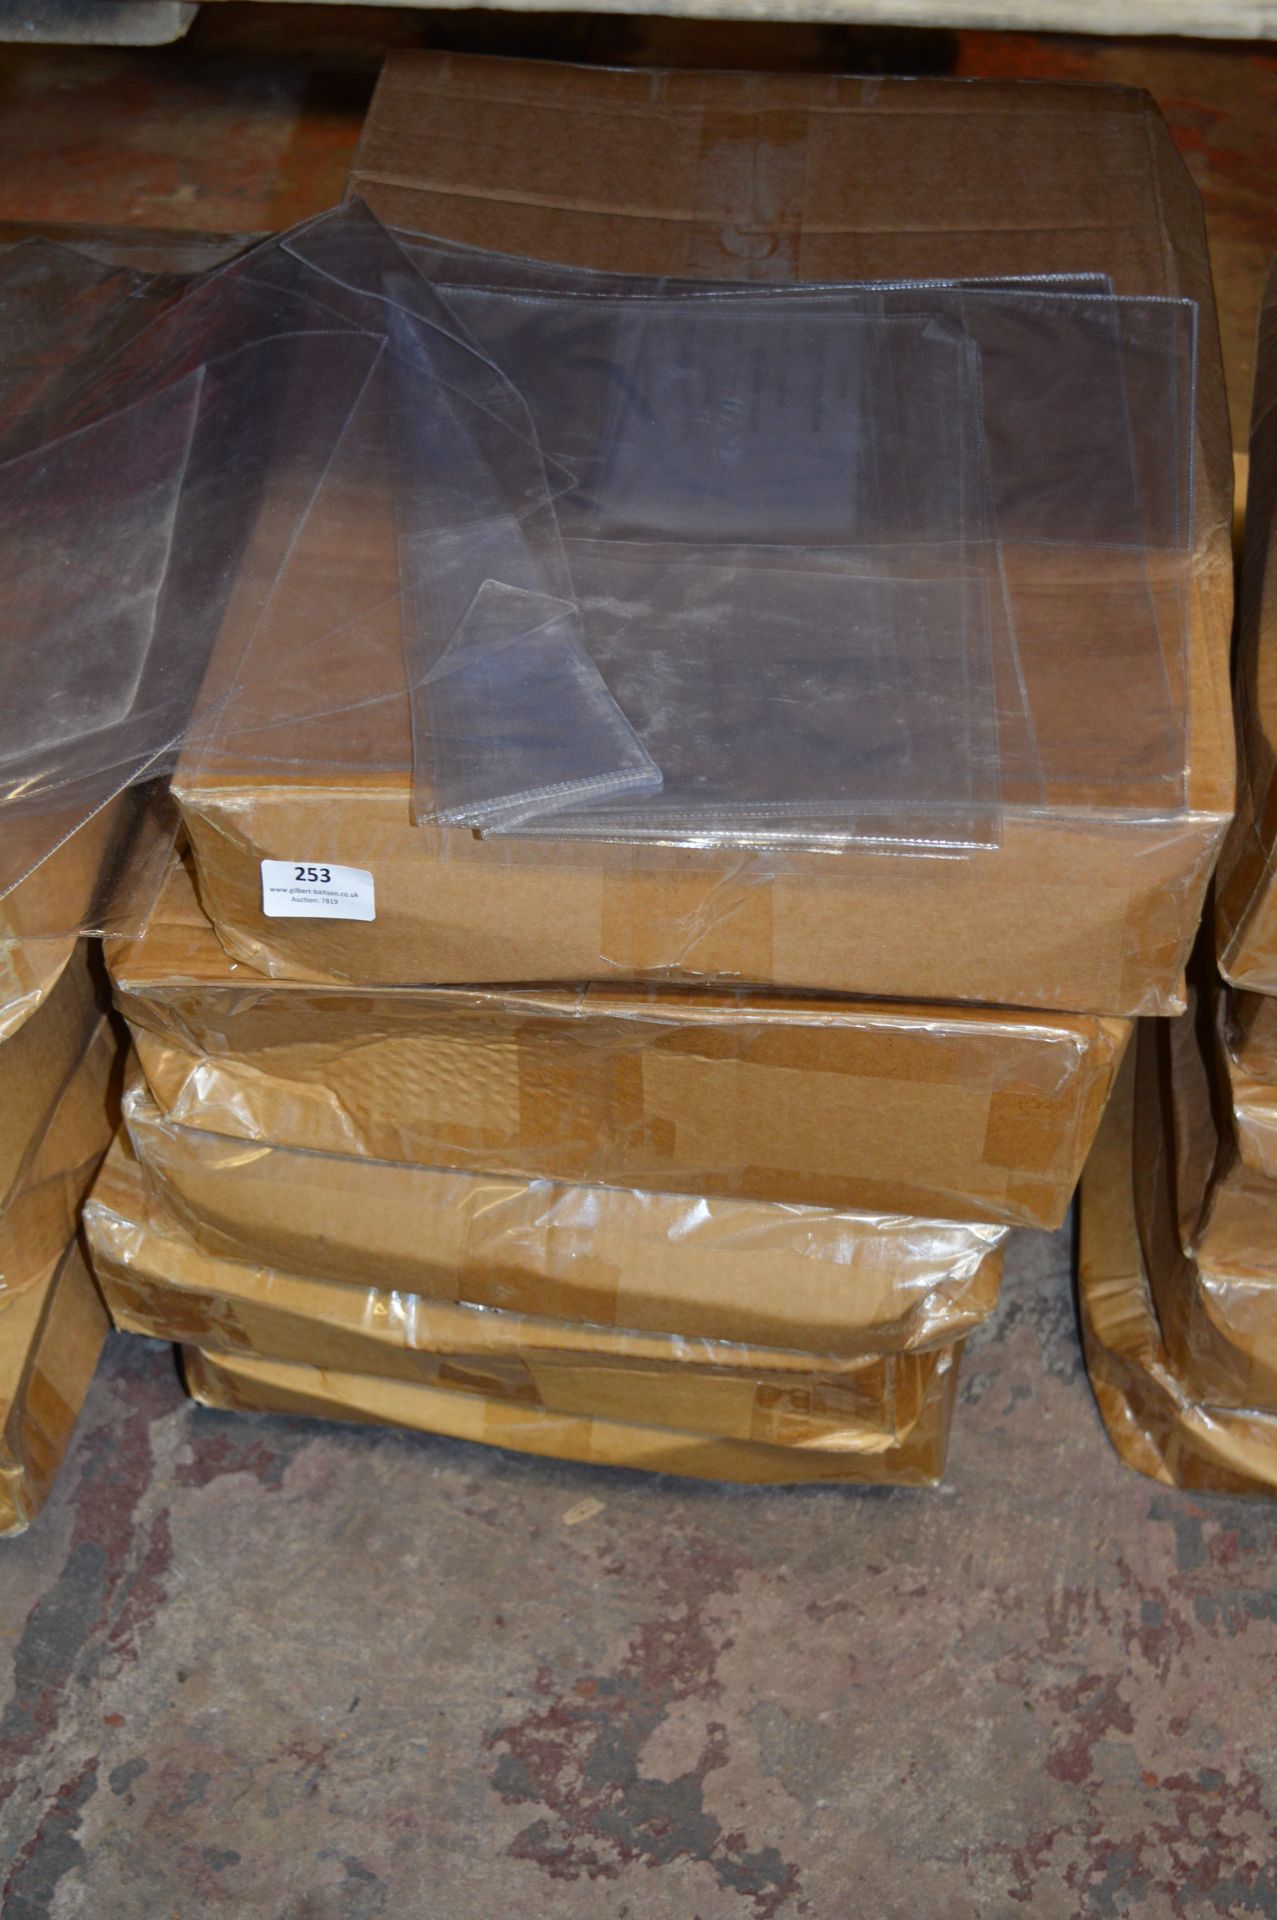 Six Boxes Containing Clear Plastic Wallets